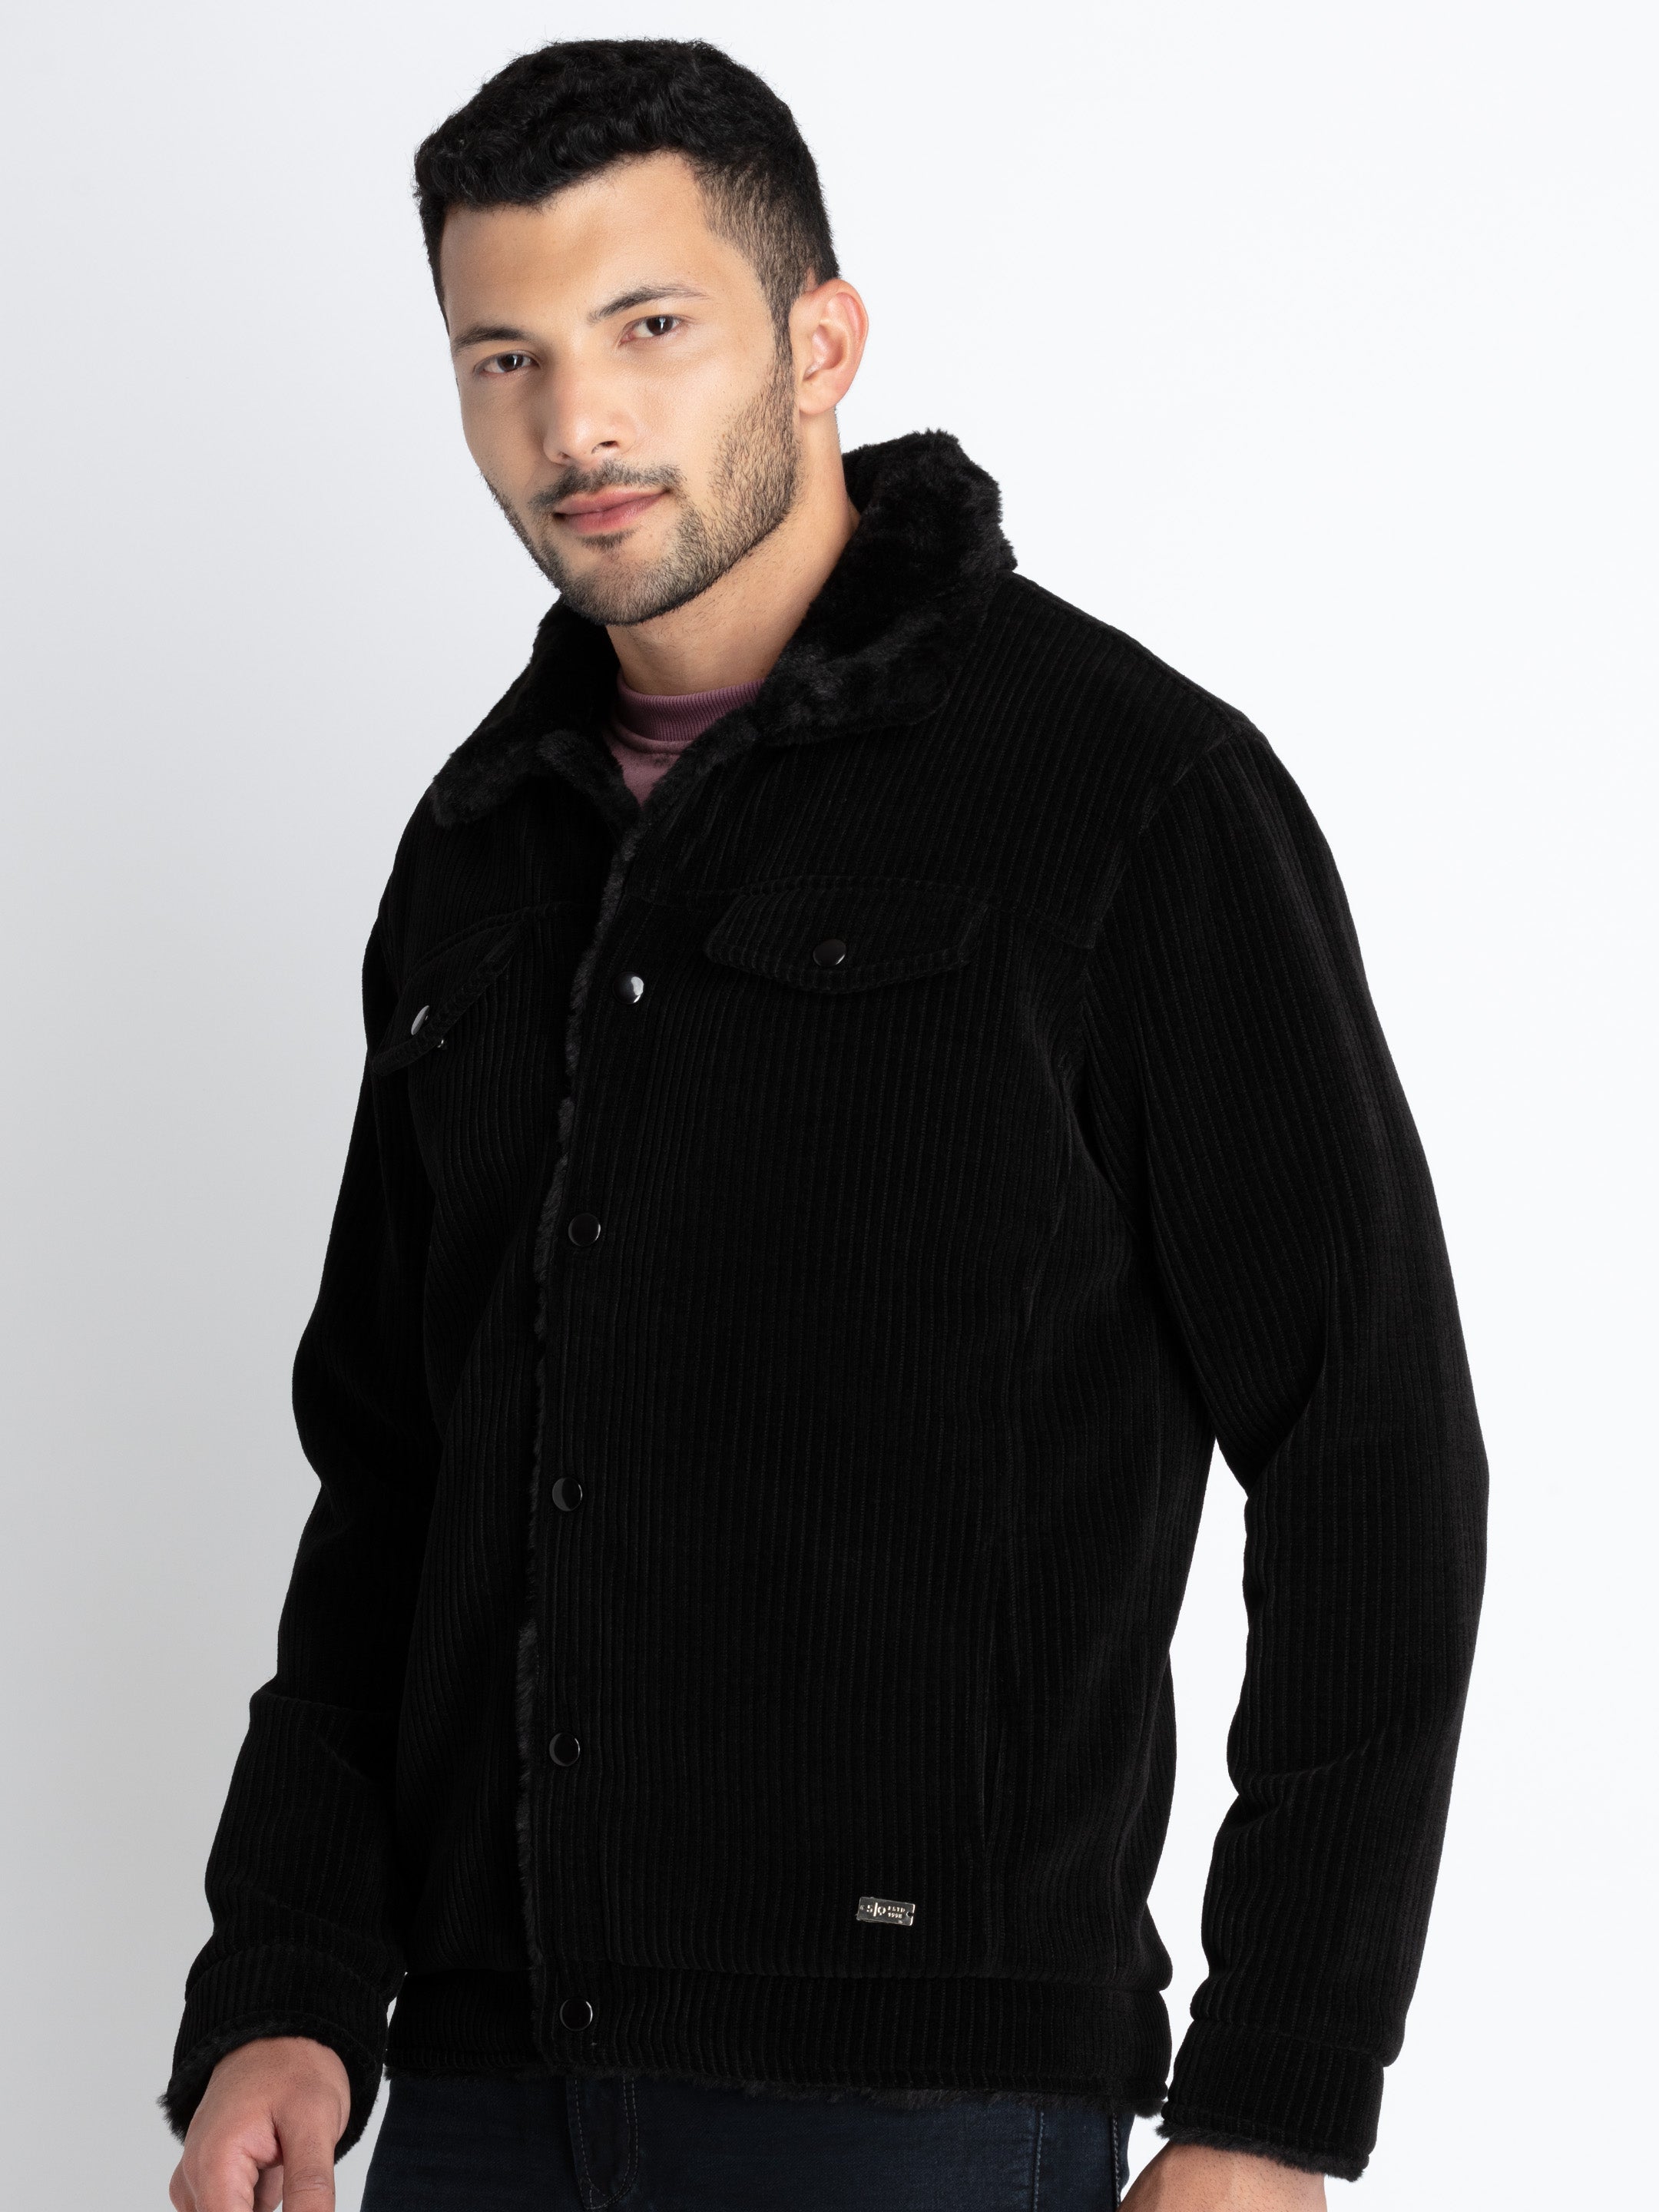 Nuon Black Corduroy Relaxed Fit Jacket – Cherrypick